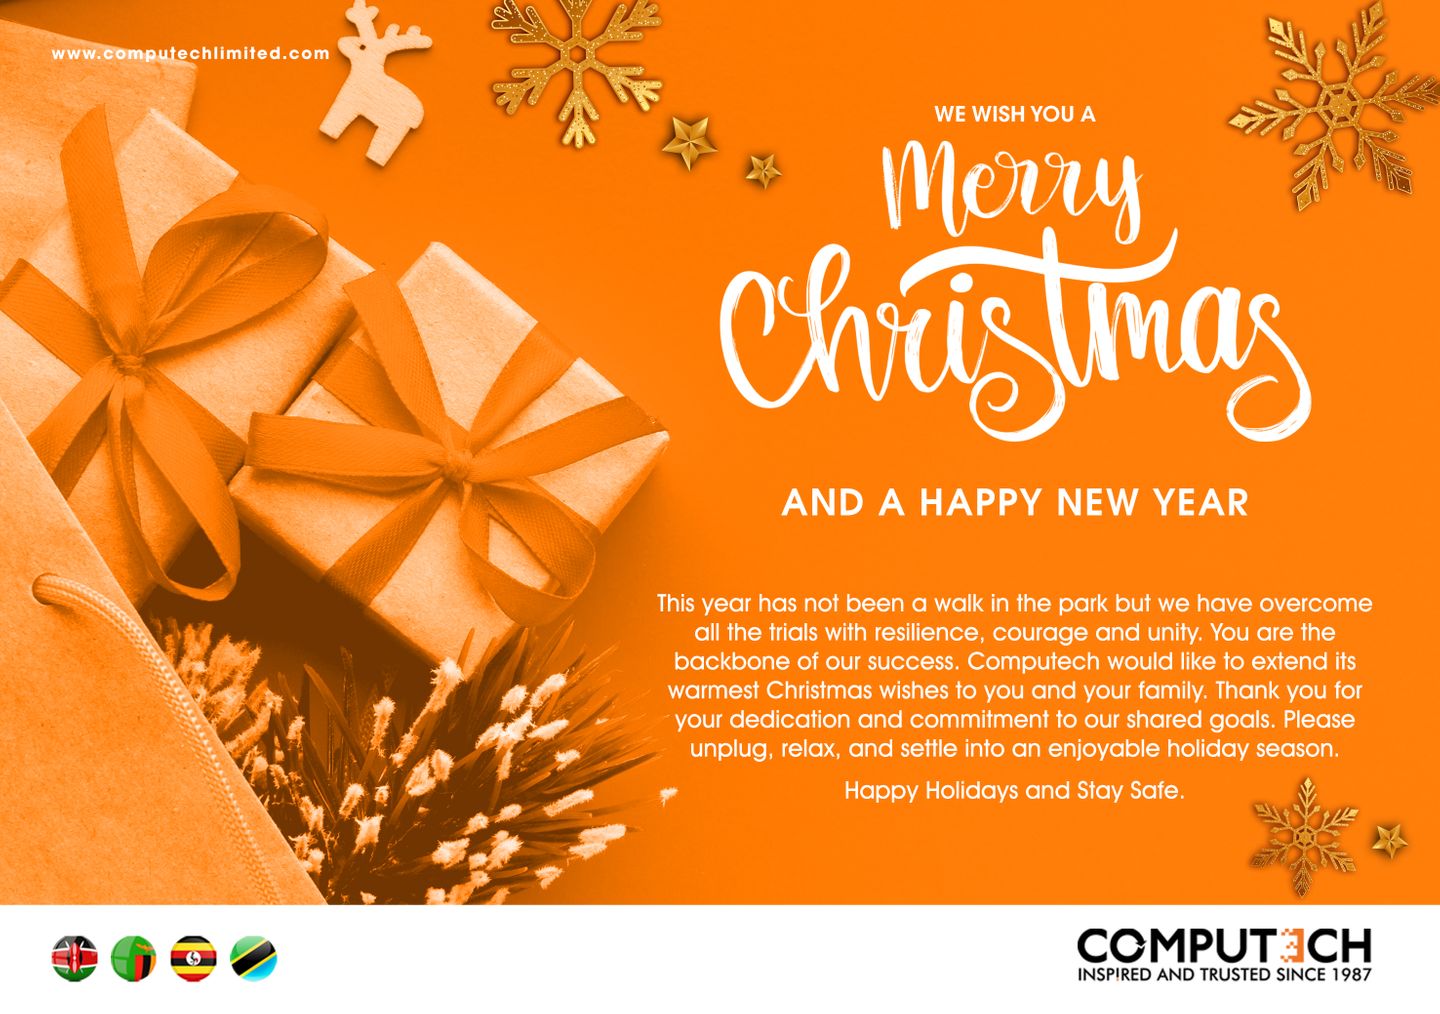 Figure 3: Merry Christmas and a Happy New Year from the Leading Systems Integrator in Kenya & East Africa